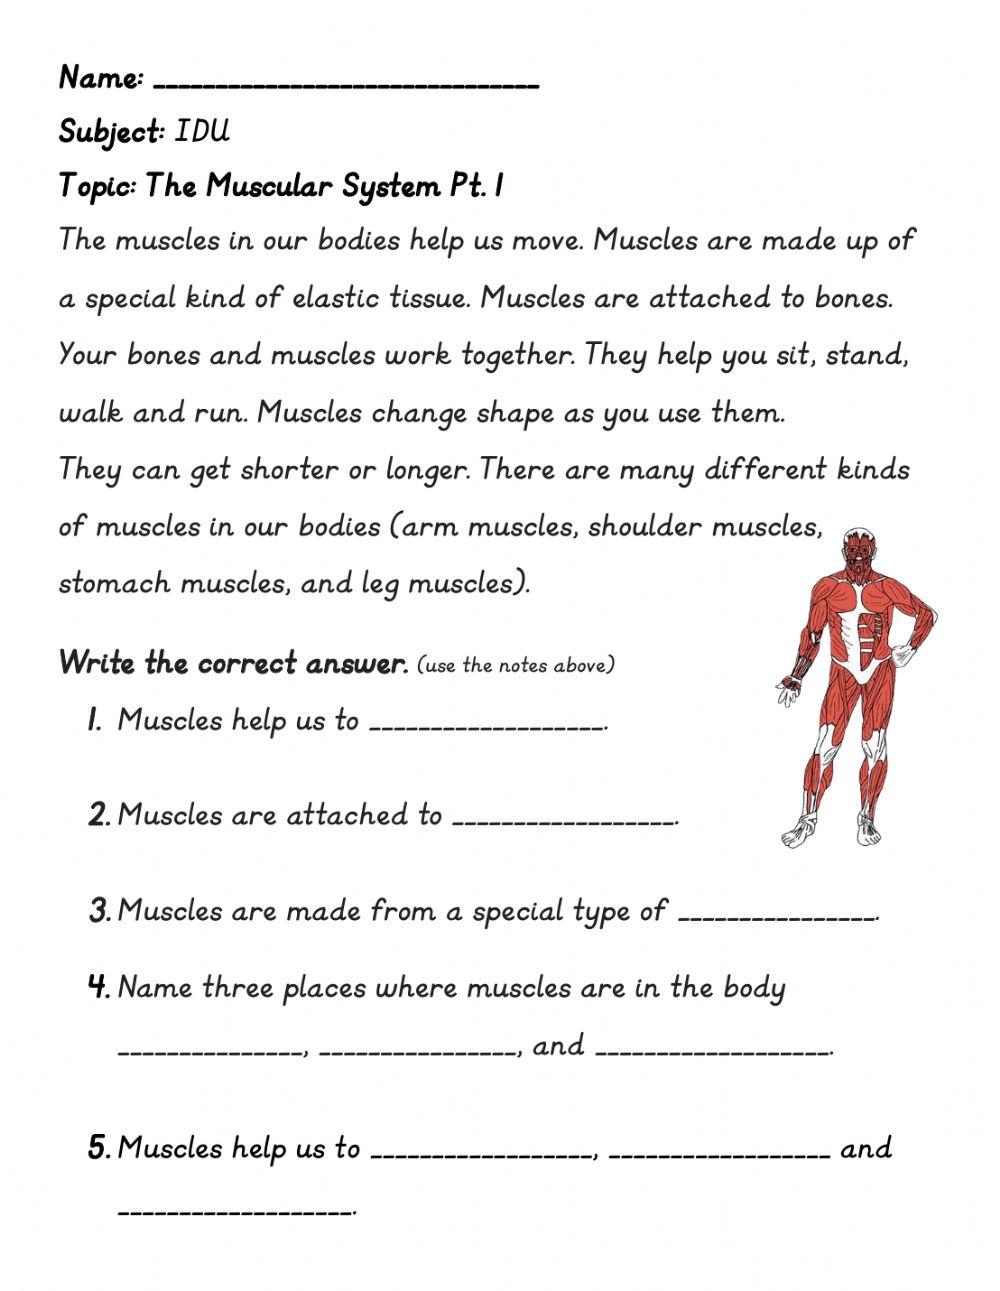 The Muscular System Pt.1